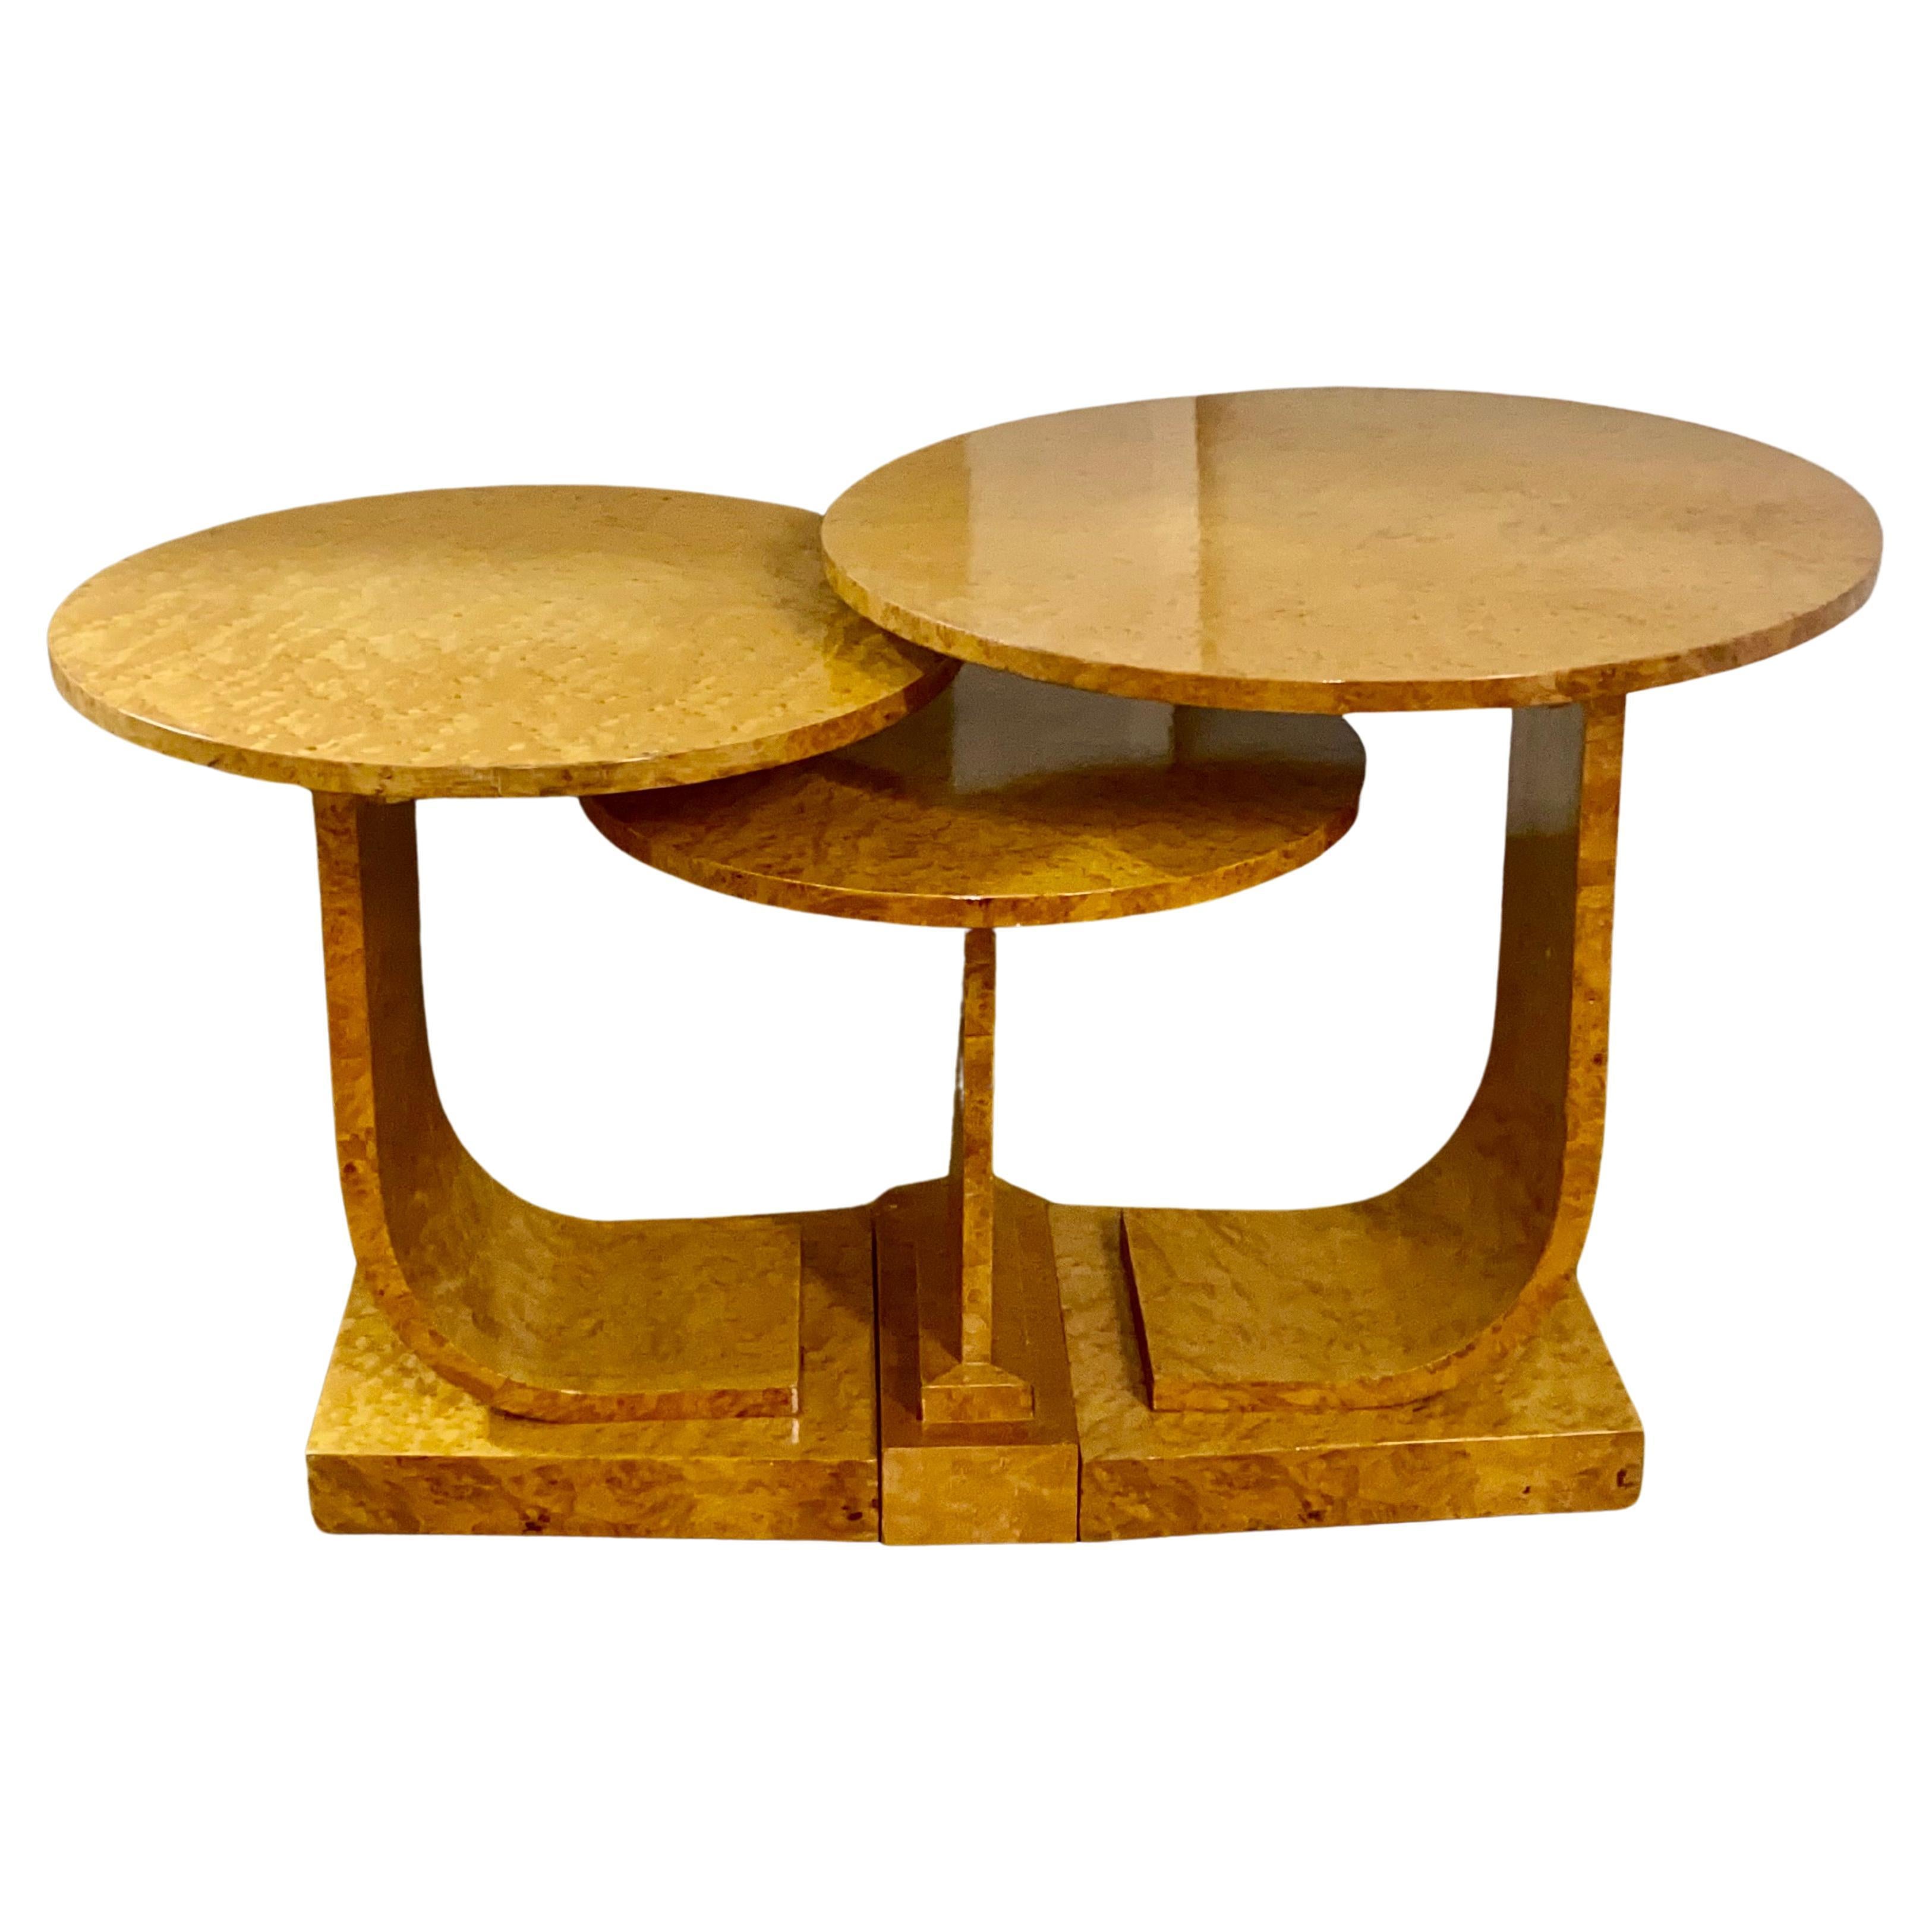 A Rare Art Deco Blonde Birds Eye Maple J Nest of Tables by Epstein Circa 1930 For Sale